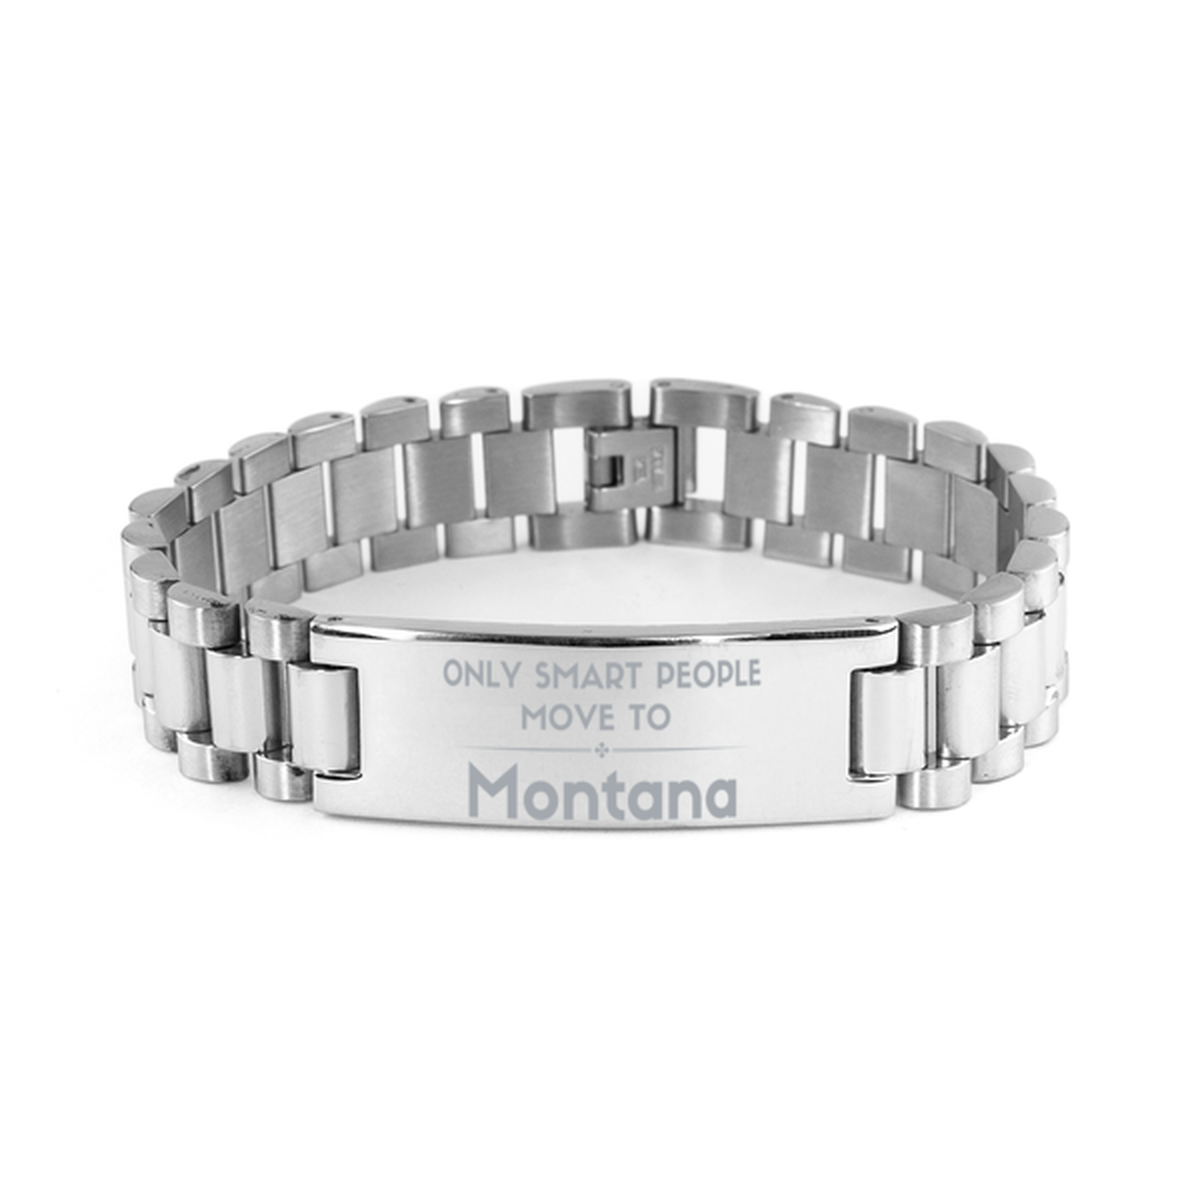 Only smart people move to Montana Ladder Stainless Steel Bracelet, Gag Gifts For Montana, Move to Montana Gifts for Friends Coworker Funny Saying Quote